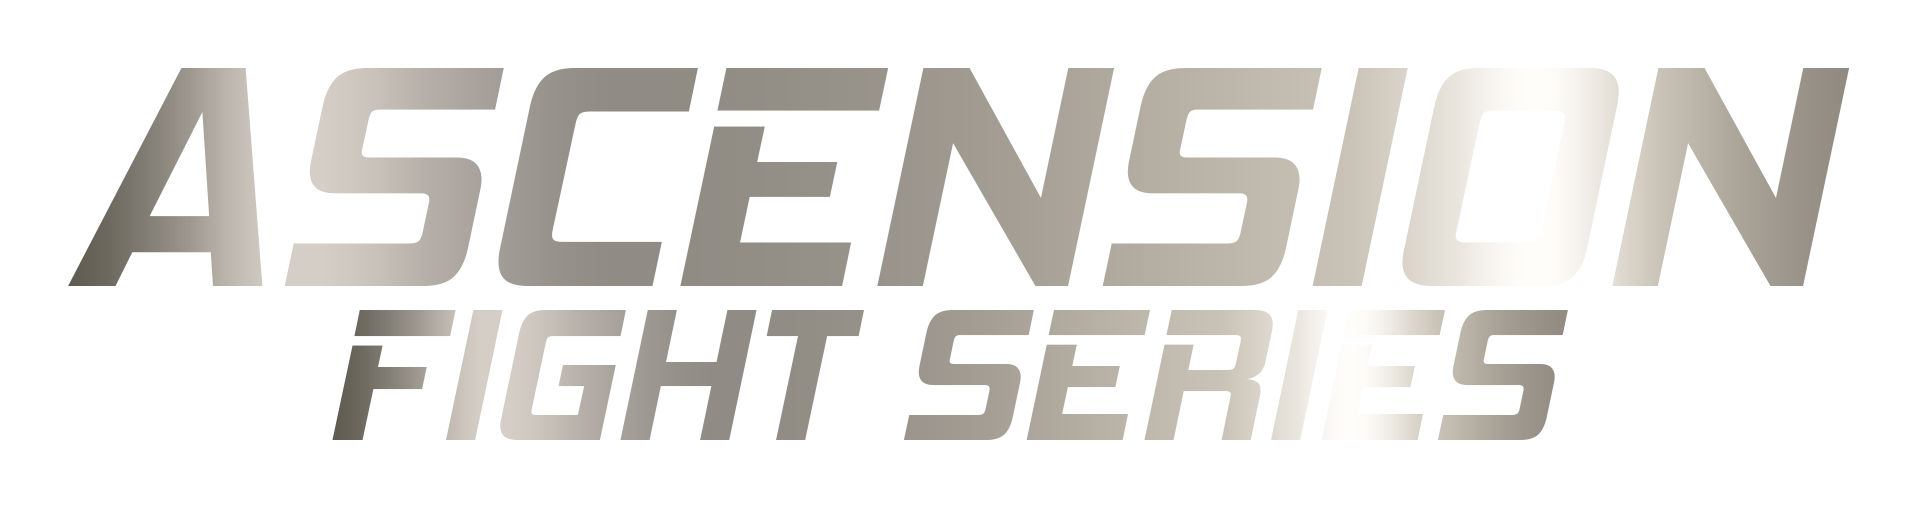 Ascension Fight Series